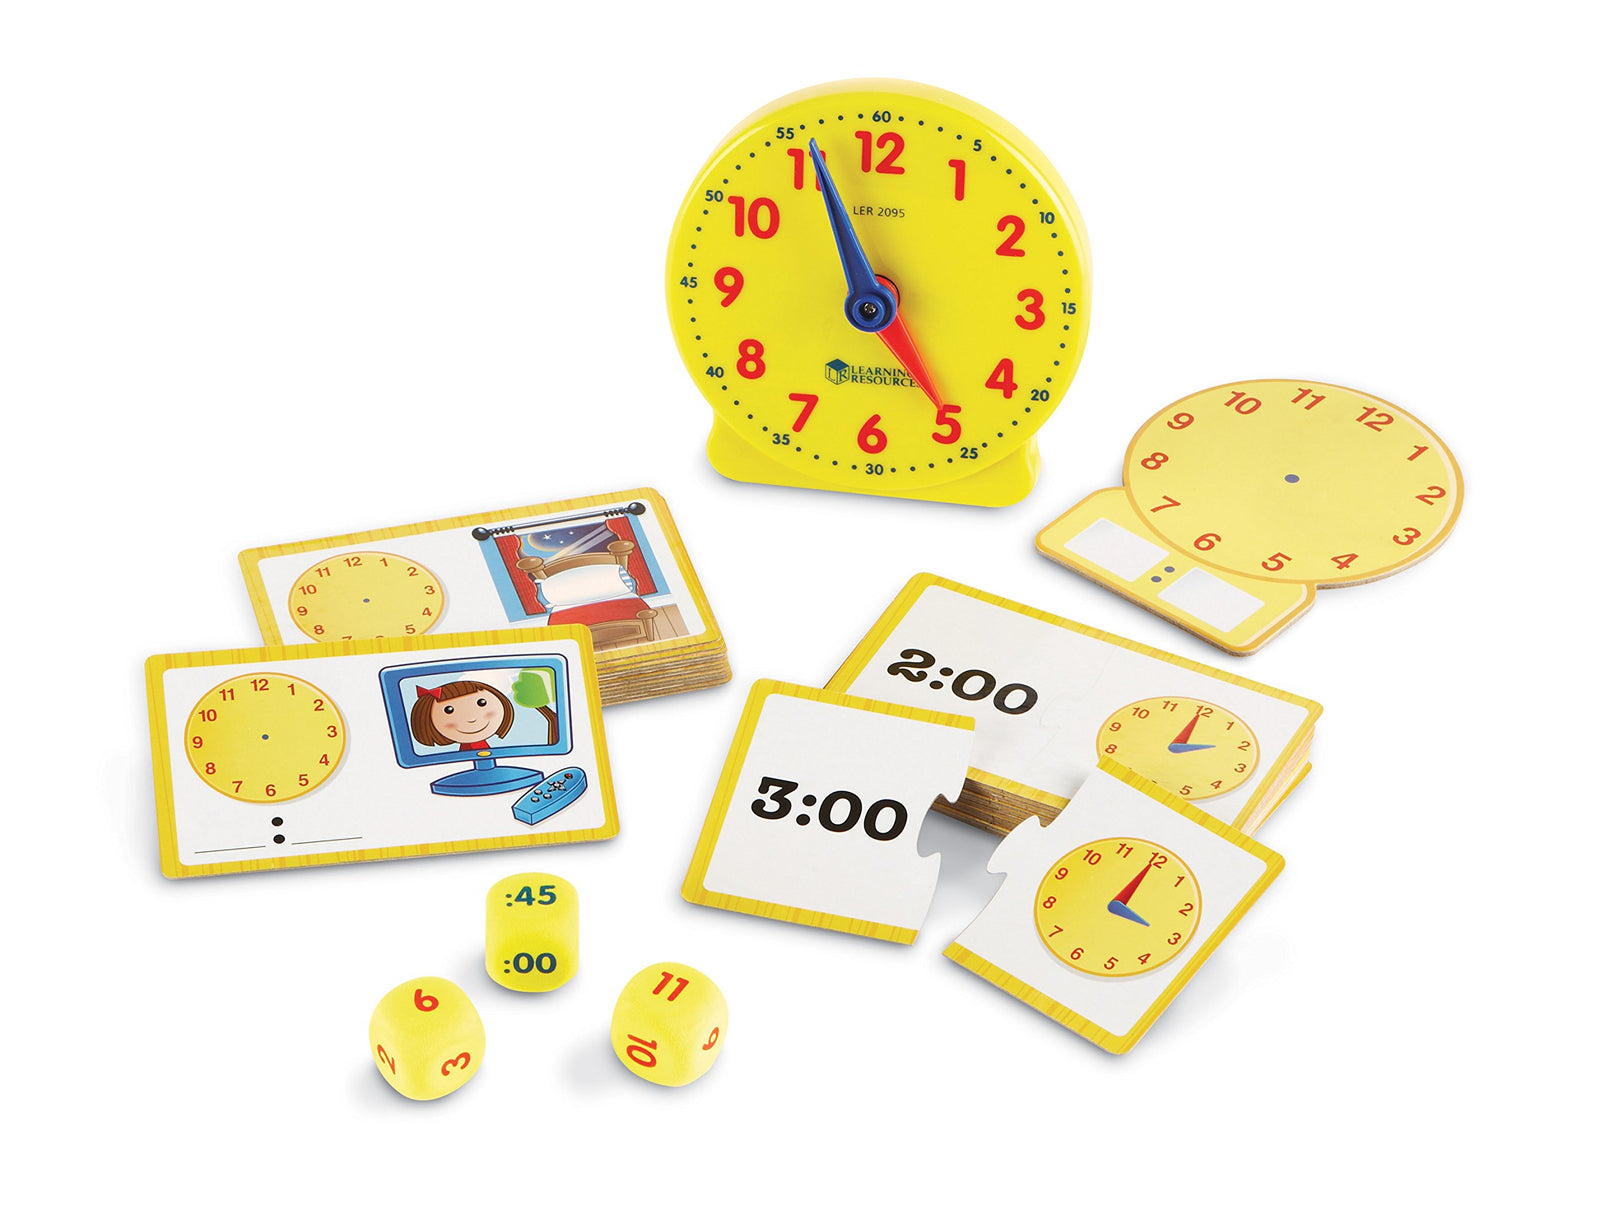 Learning Resources Time Activity Set, Homeschool, Back to School Activities, School Preparation Toys, Analog Clock, Tactile Learning, 41 Pieces, Ages 5+